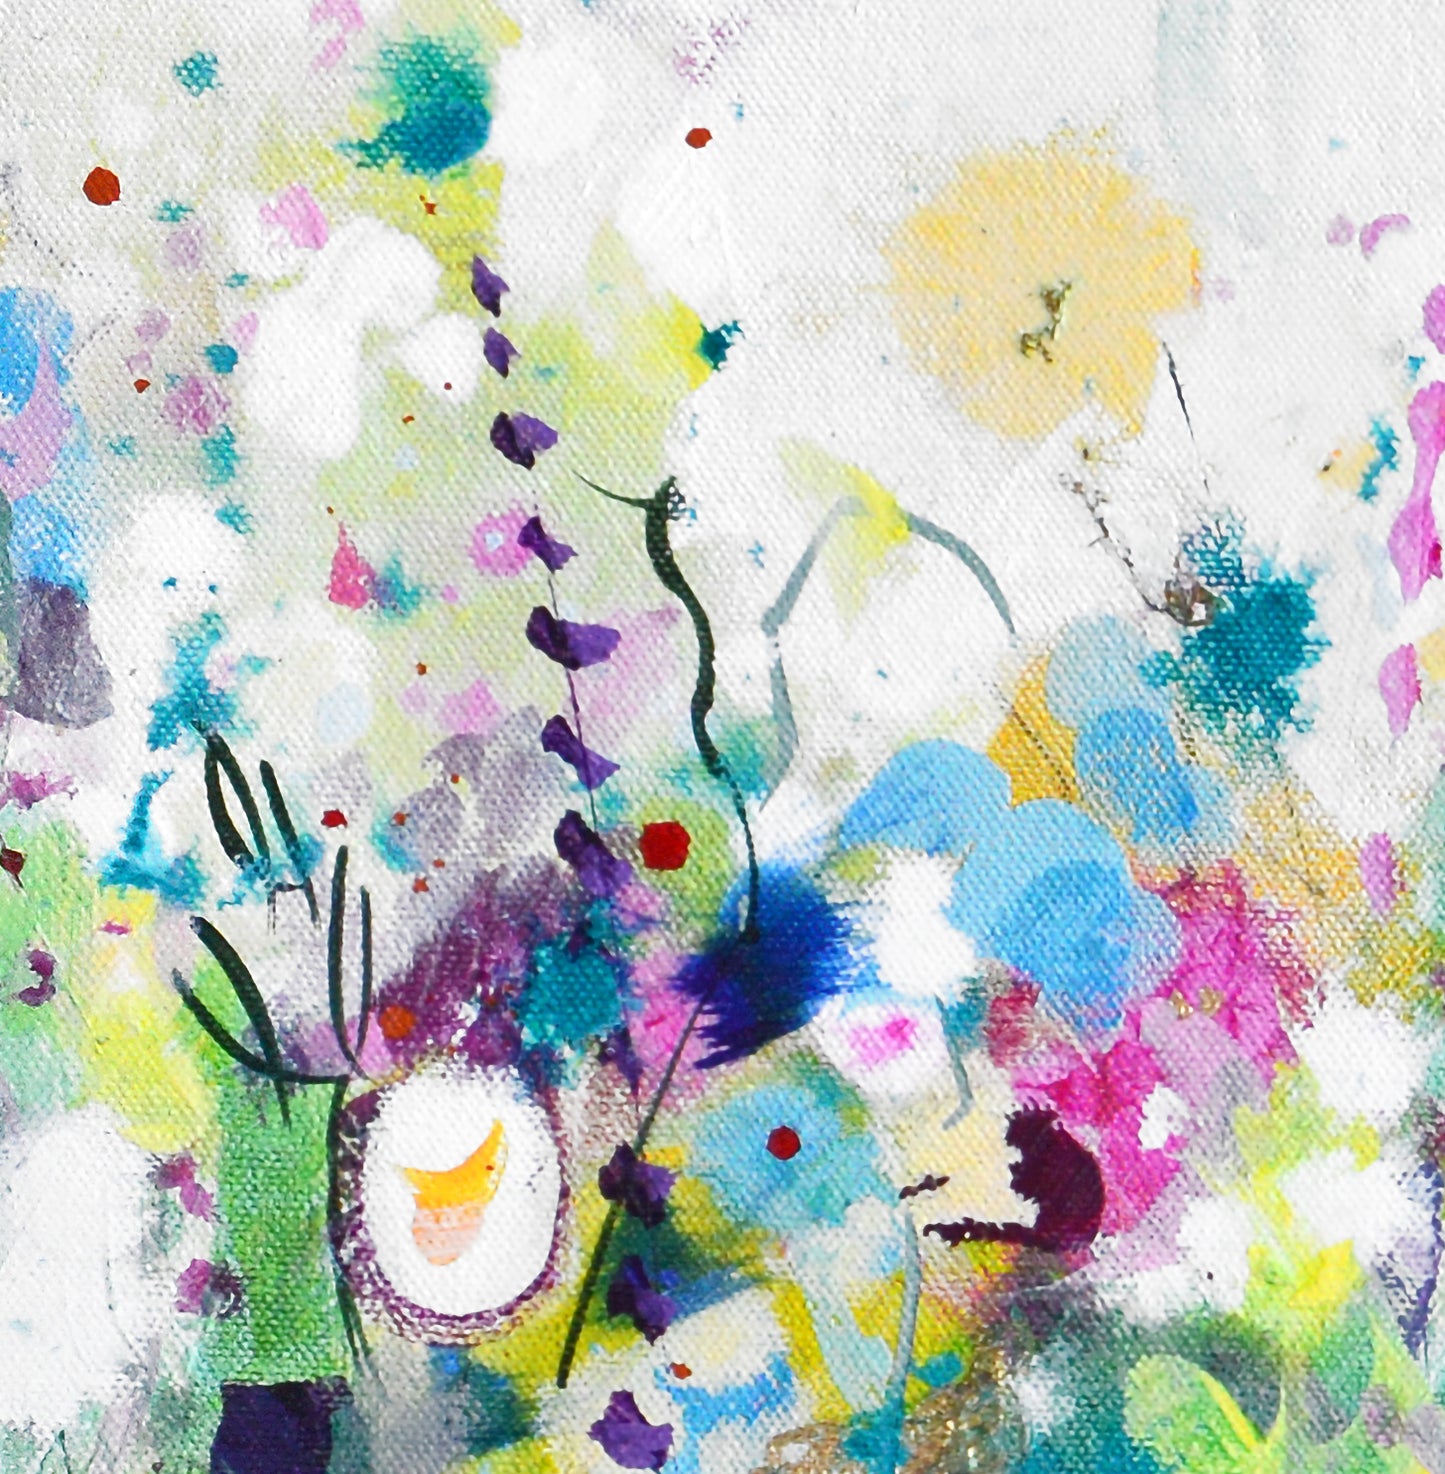 Floral Meadow Art Giclee Print on Stretched Canvas